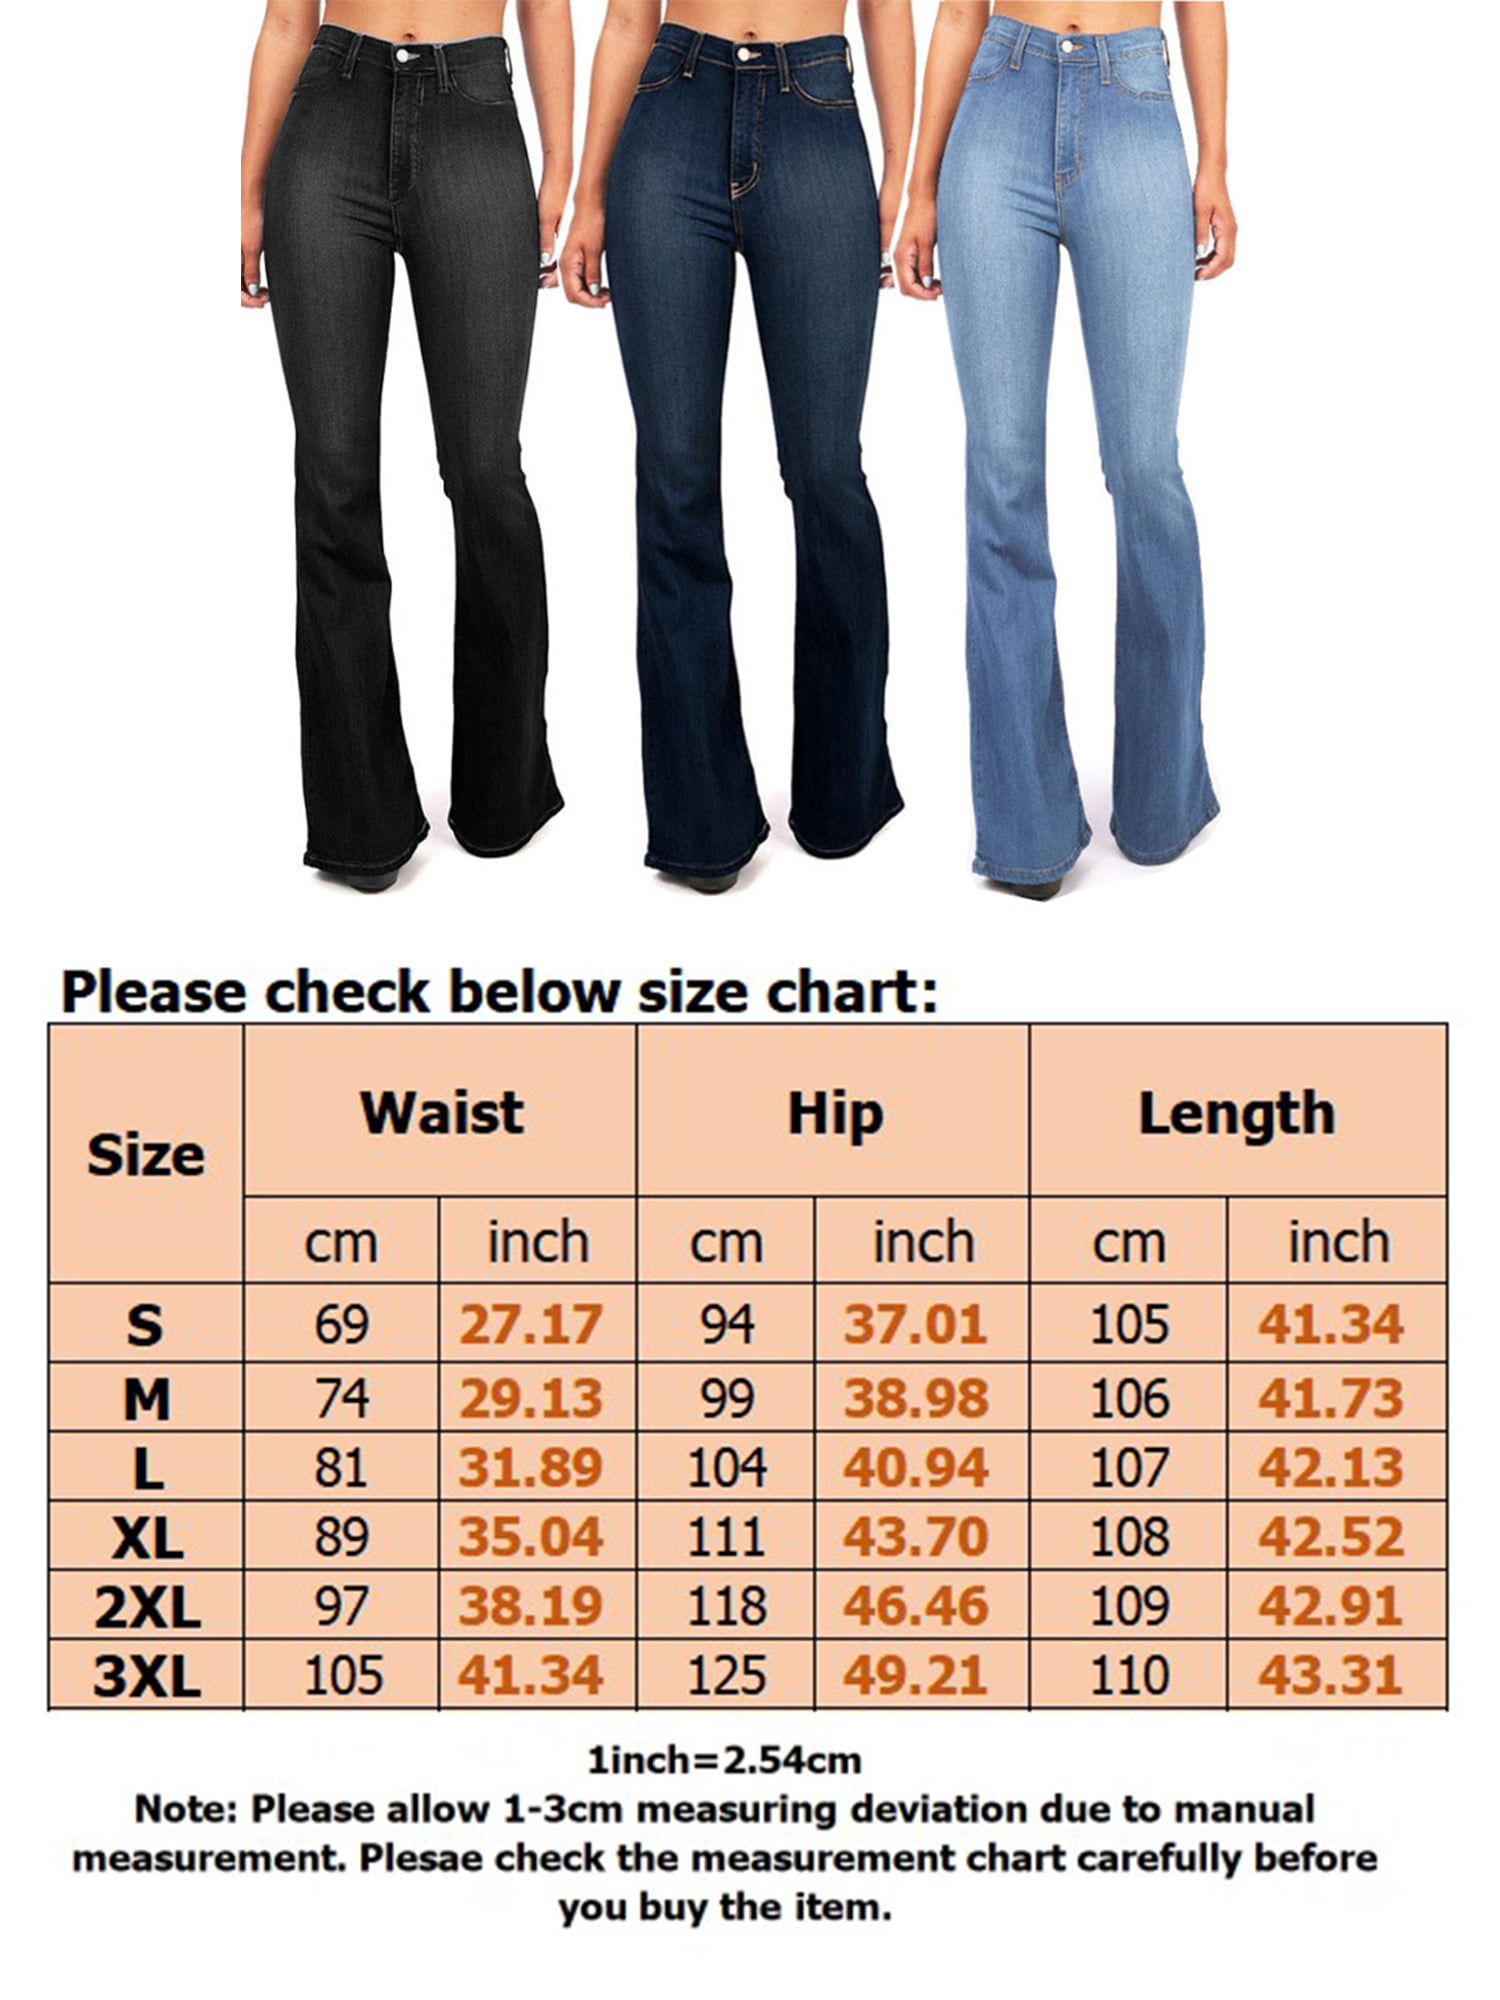 Bell Bottoms Denim Pants for Women Casual Slim Fit Flare Jeans High Rise Denim Jeans Trousers - image 2 of 3